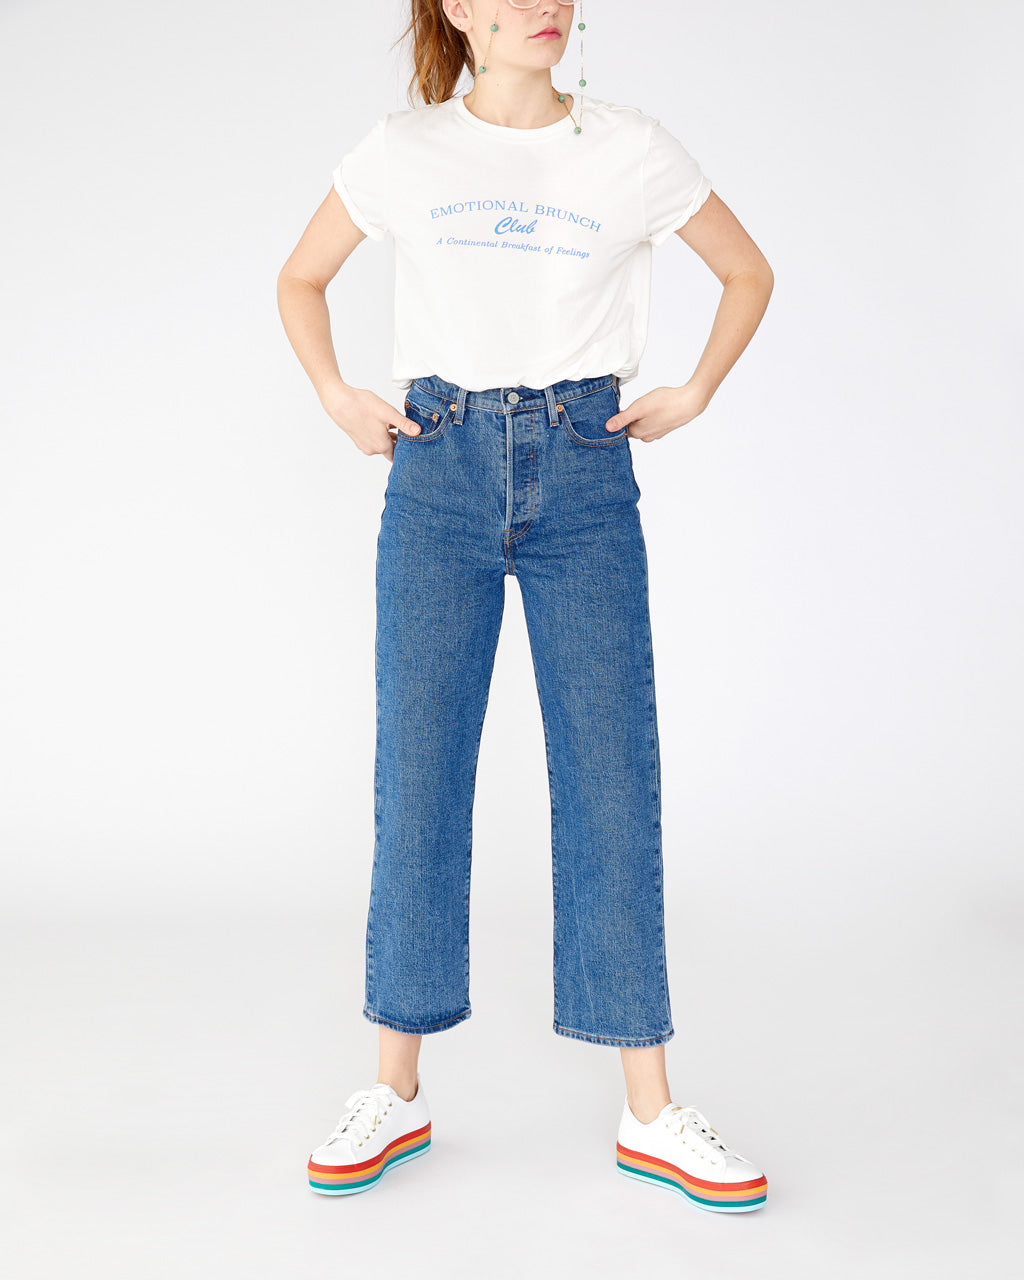 Ribcage Straight Ankle Jeans - Georgie by Levi's - jeans - ban.do